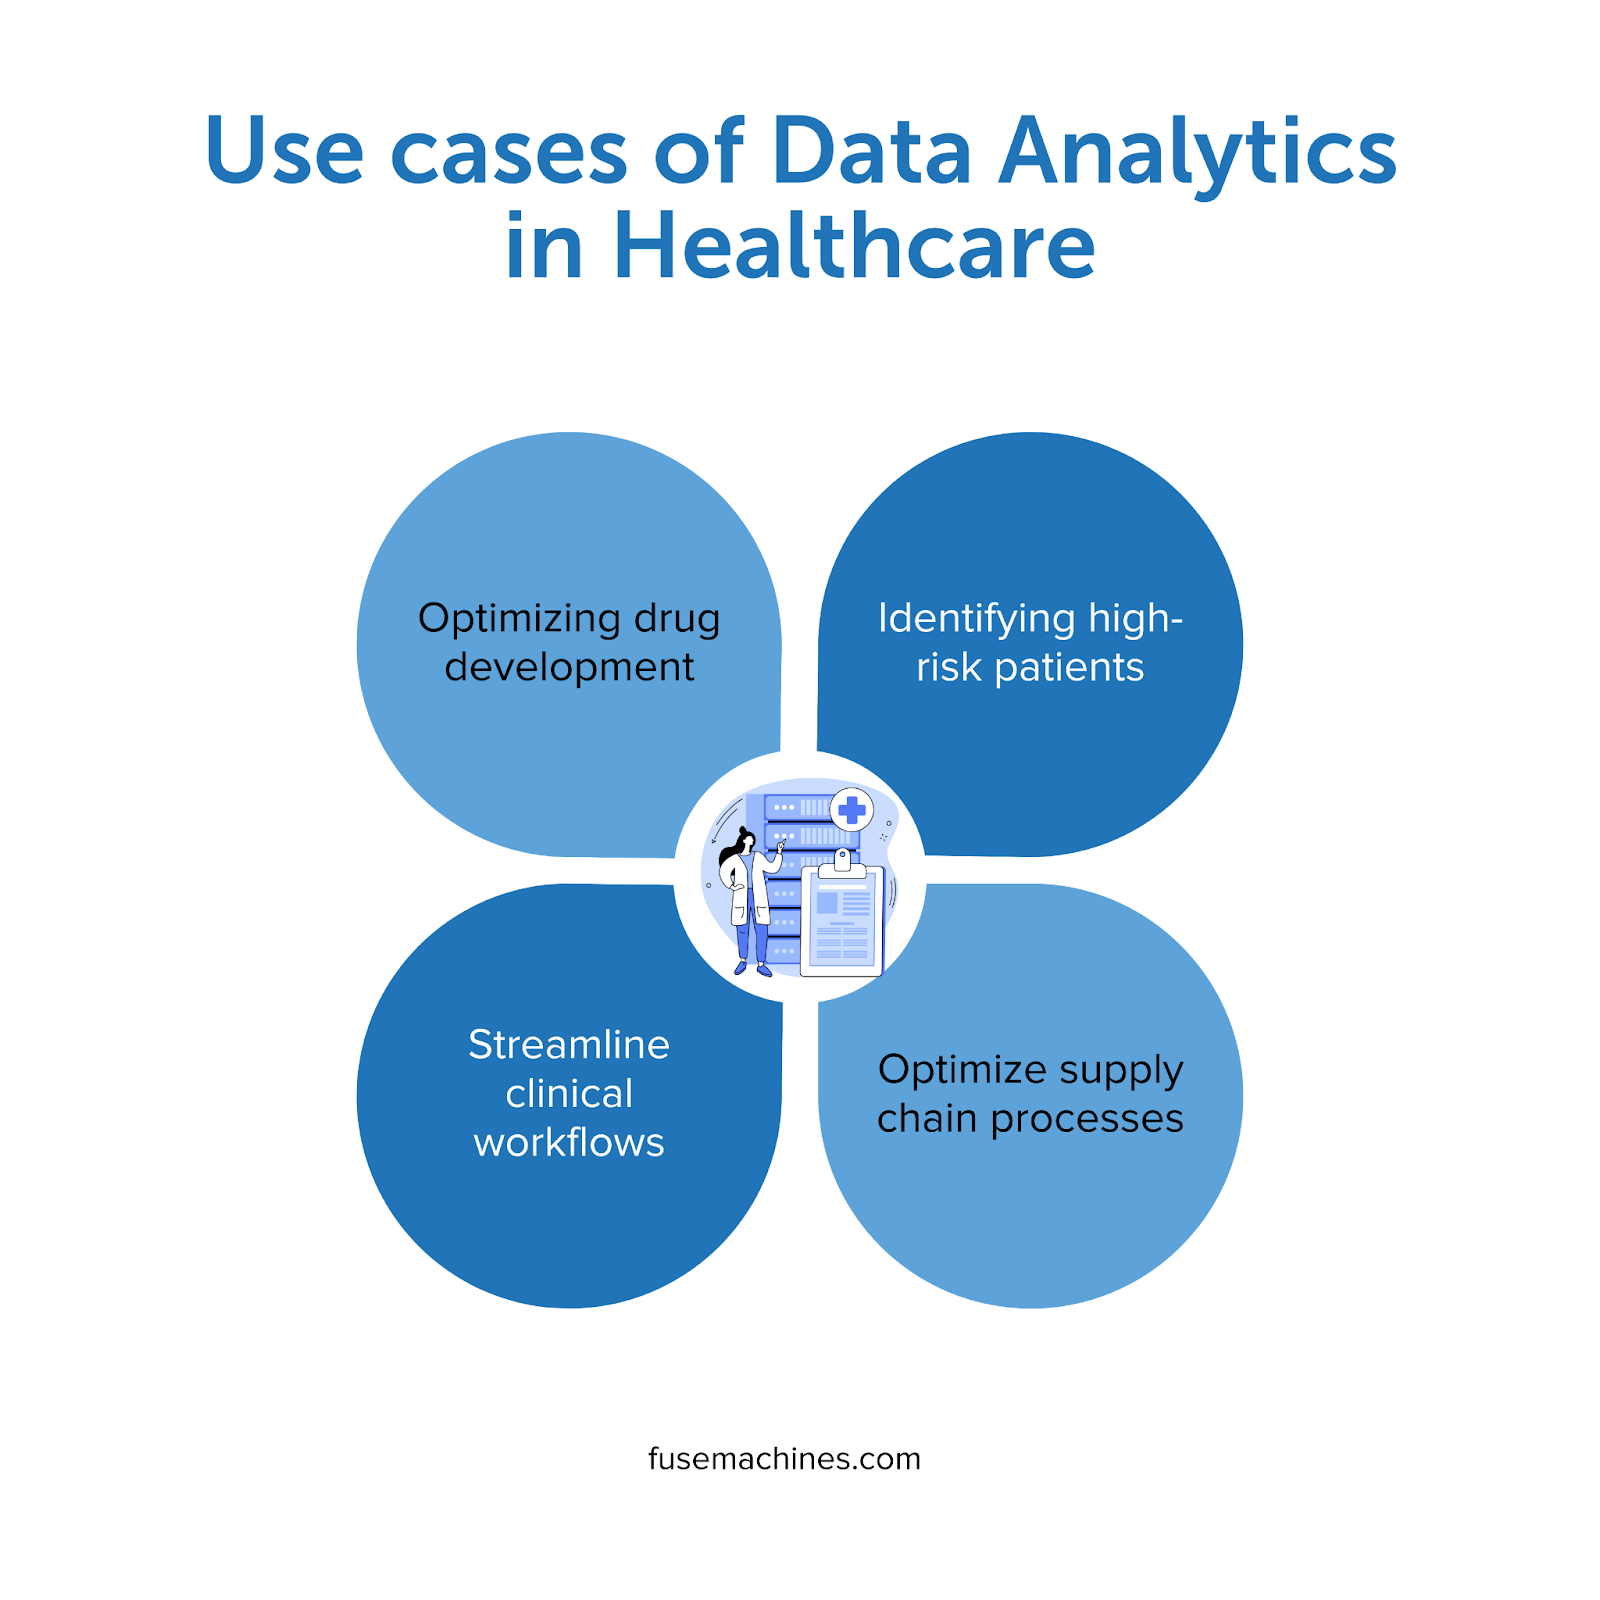 Use cases data analytics in healthcare